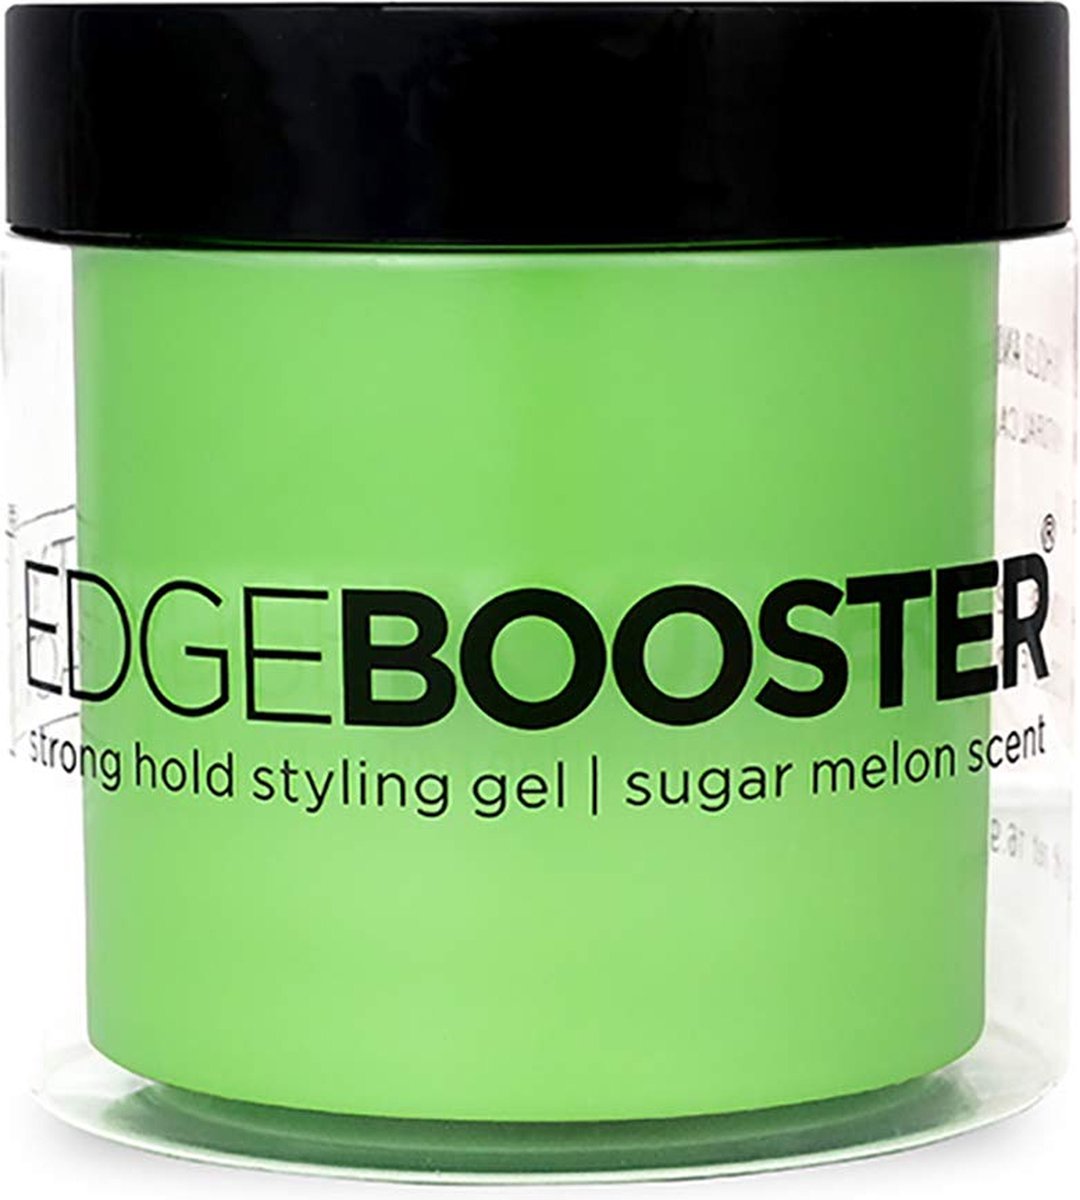 Style Factor Edge Booster Extra Hold Styling Gel Sugar Melon Scent 16oz | 500ml